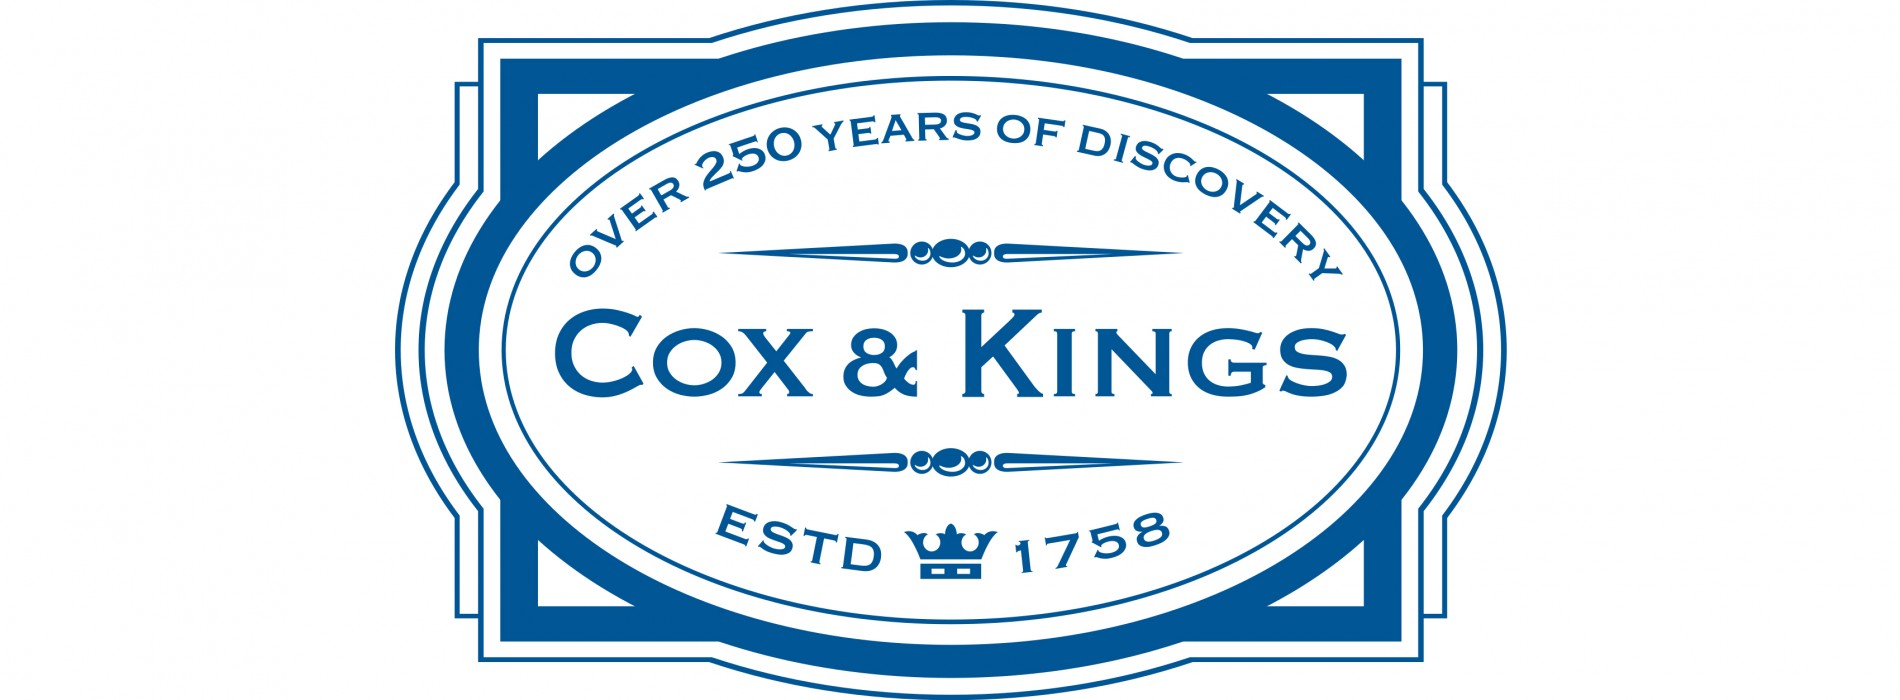 Cox & Kings wins ‘Best Travel Agency’ at the 29th Annual TTG Travel Awards 2018